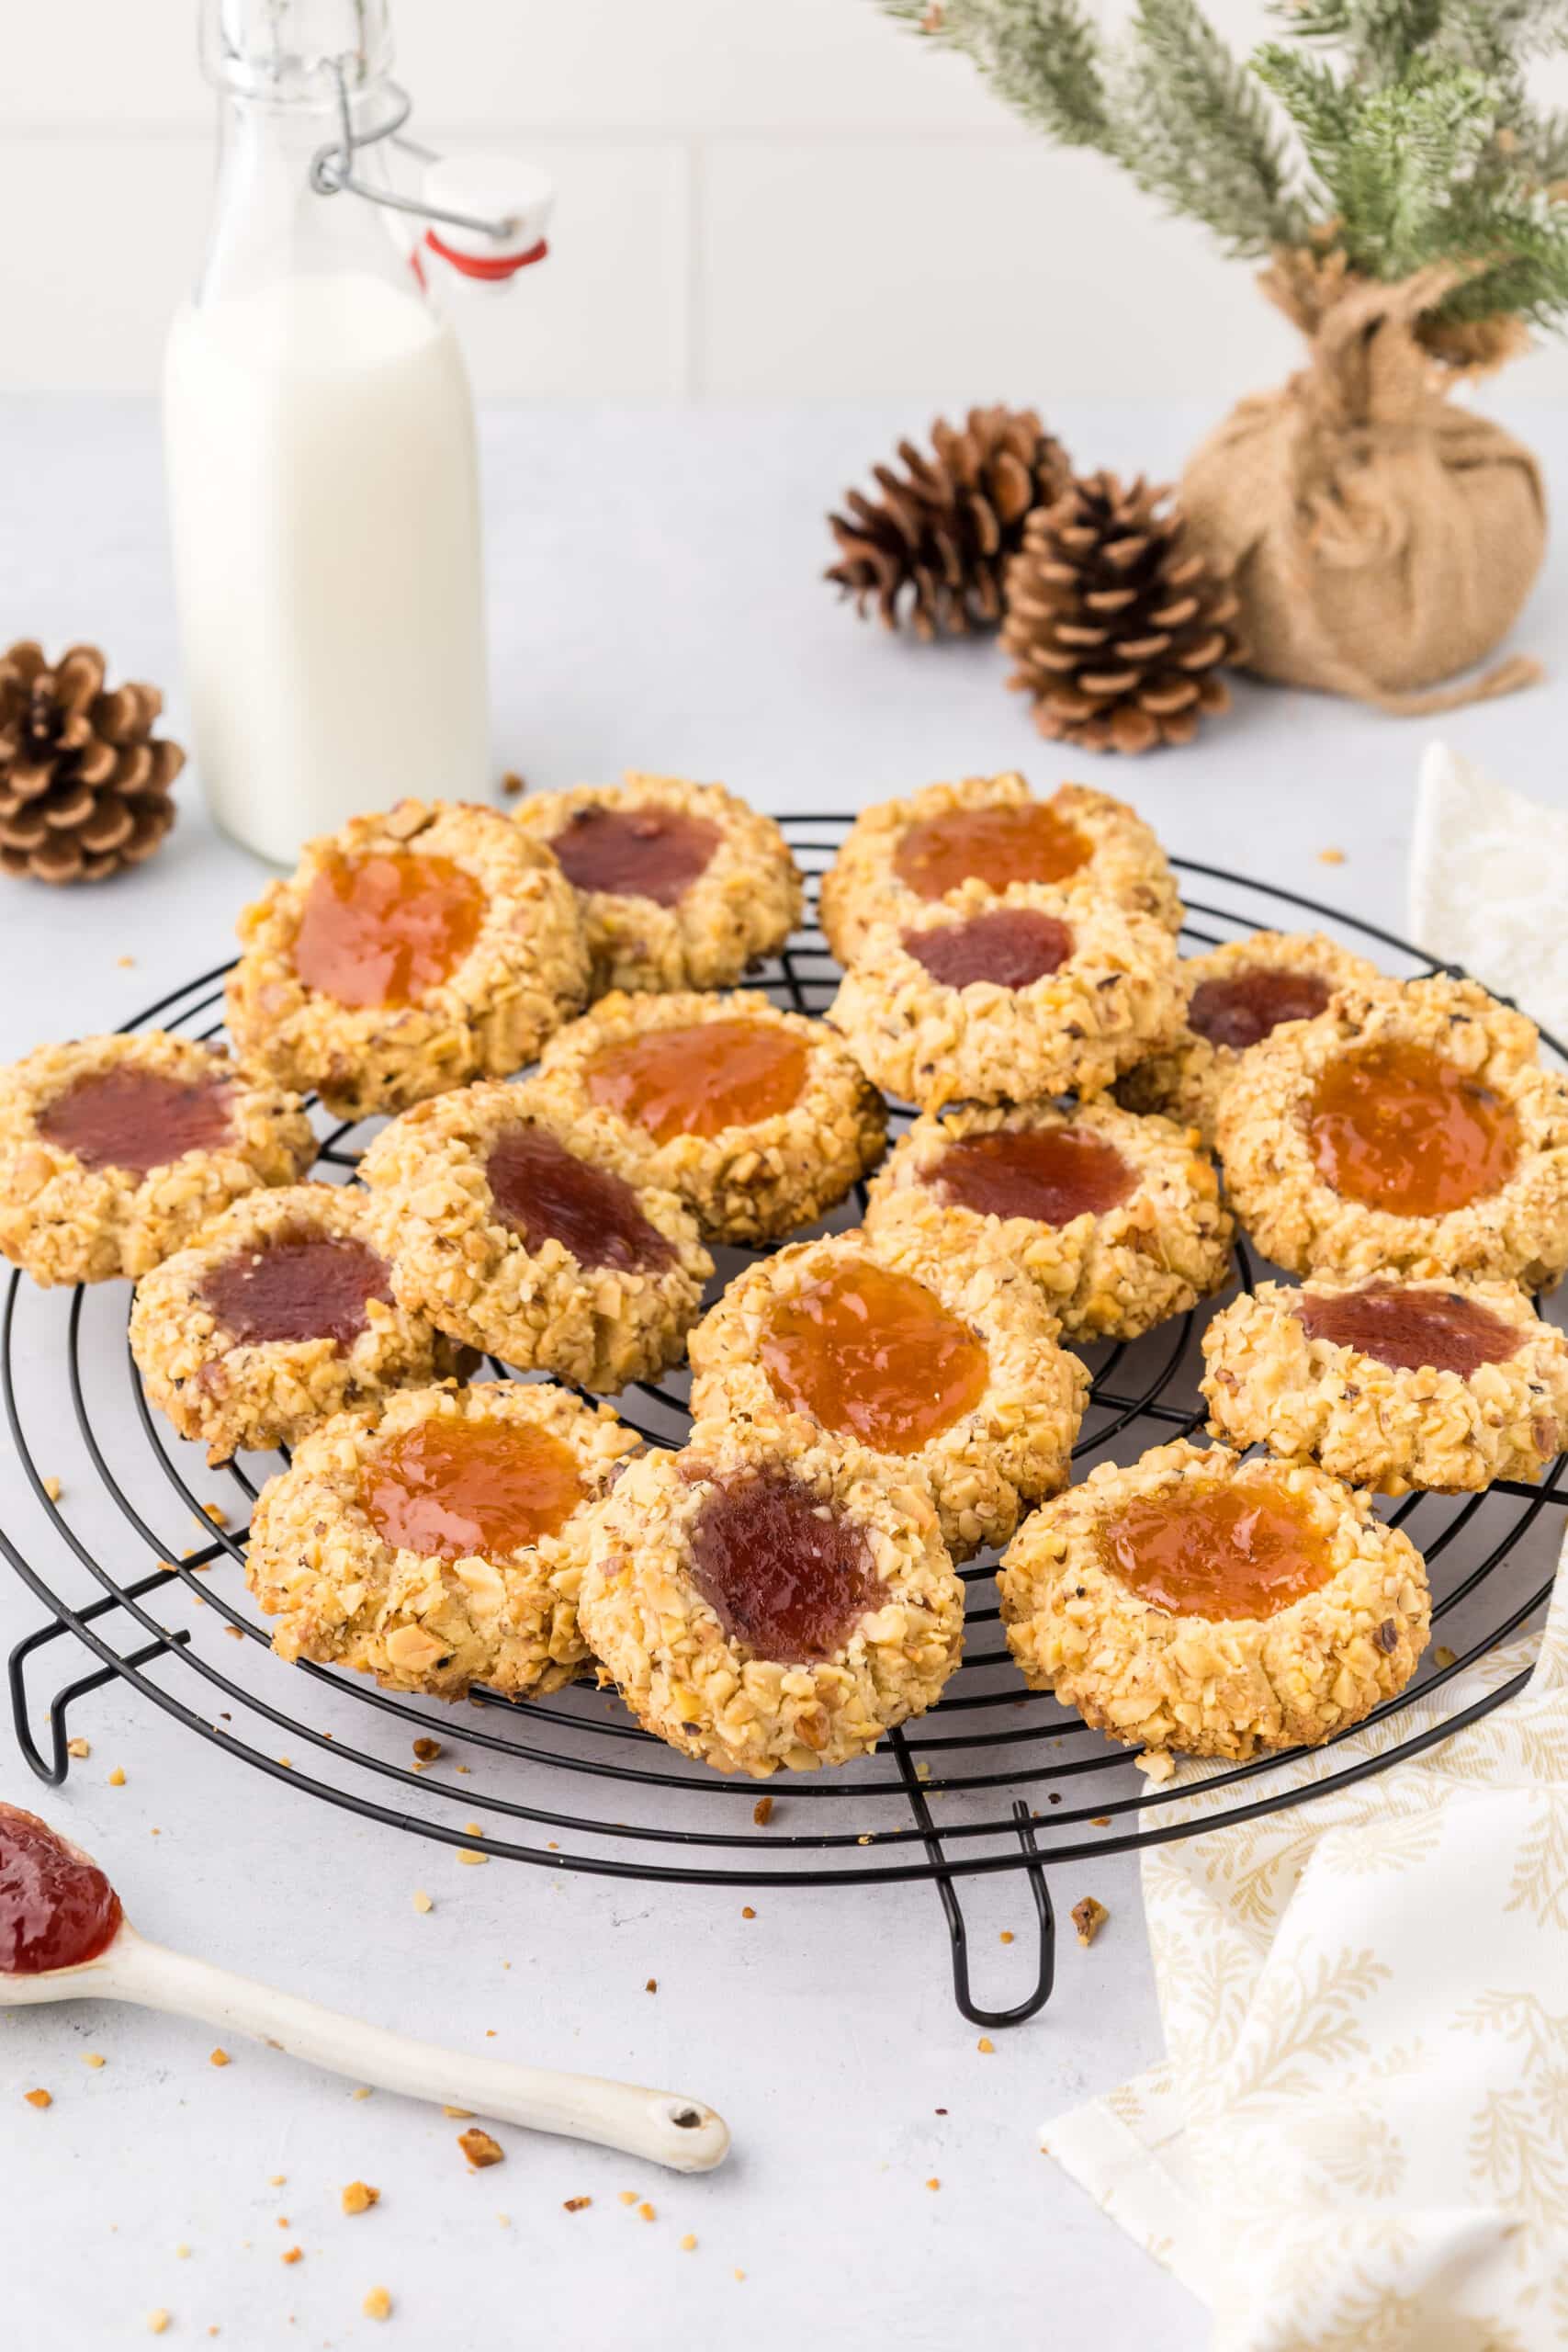 old-fashioned thumbprint cookies recipe